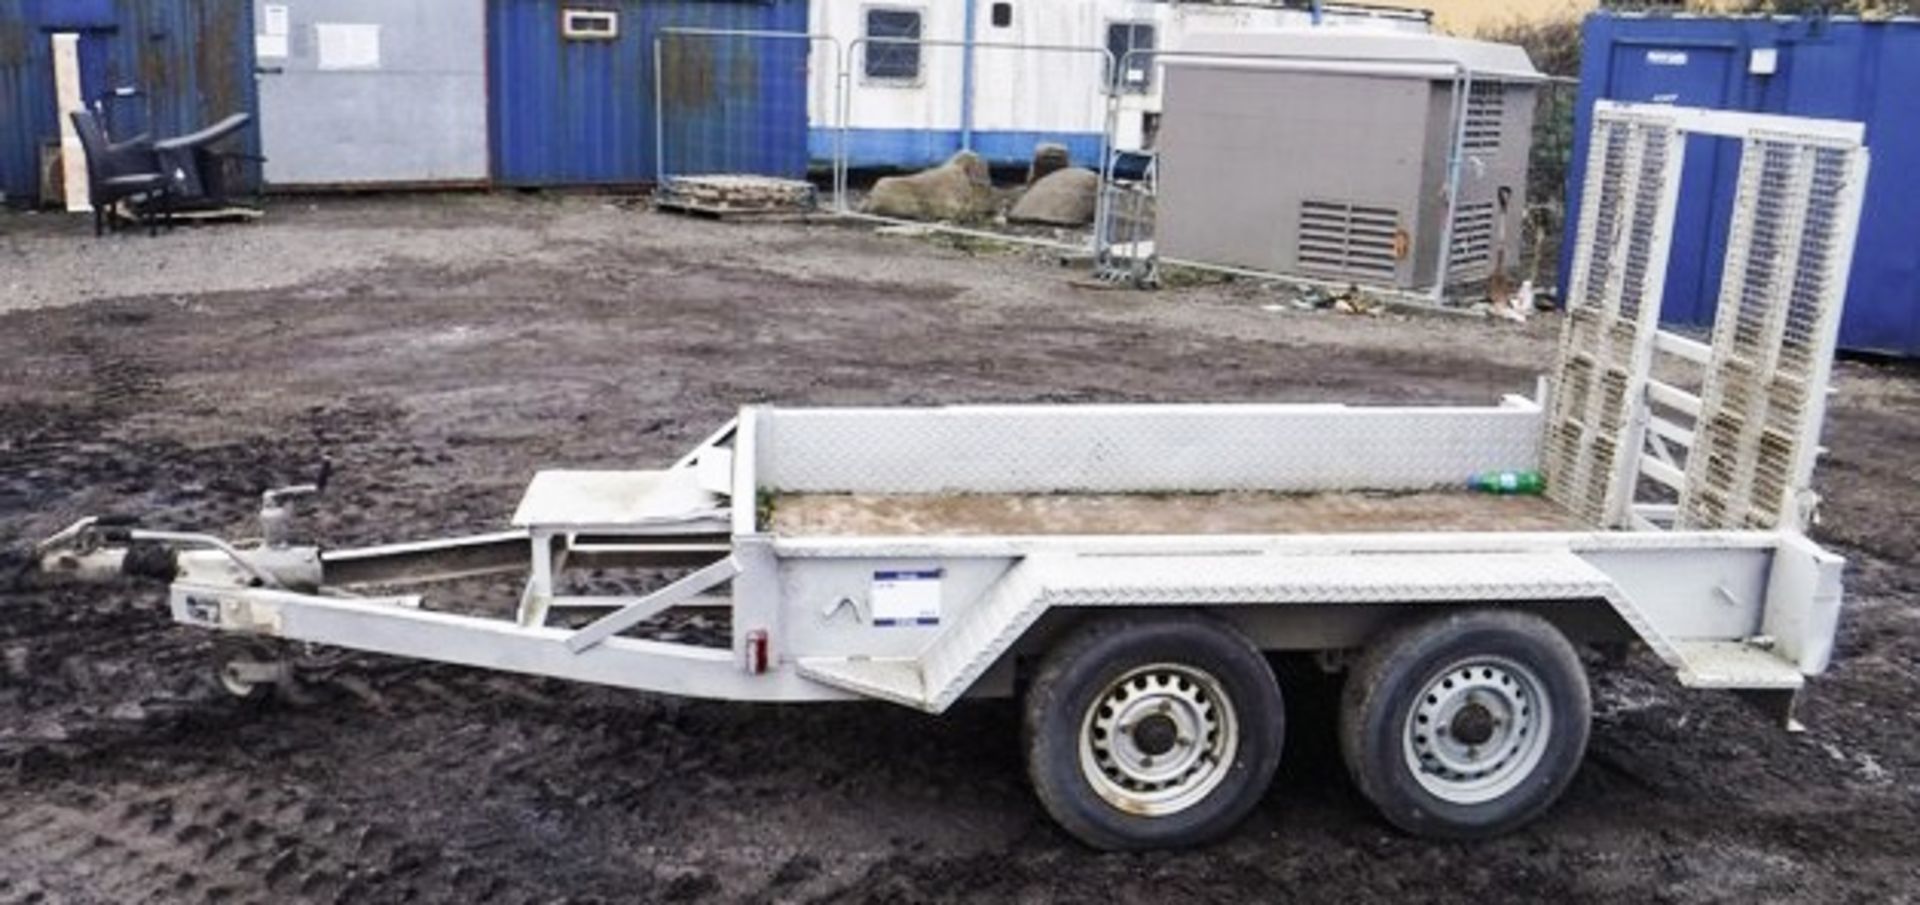 INDESPENSION 8' X 5' TWIN AXLE PLANT TRAILER WITH MESH RAMP, S/N G06600317 - Image 3 of 4